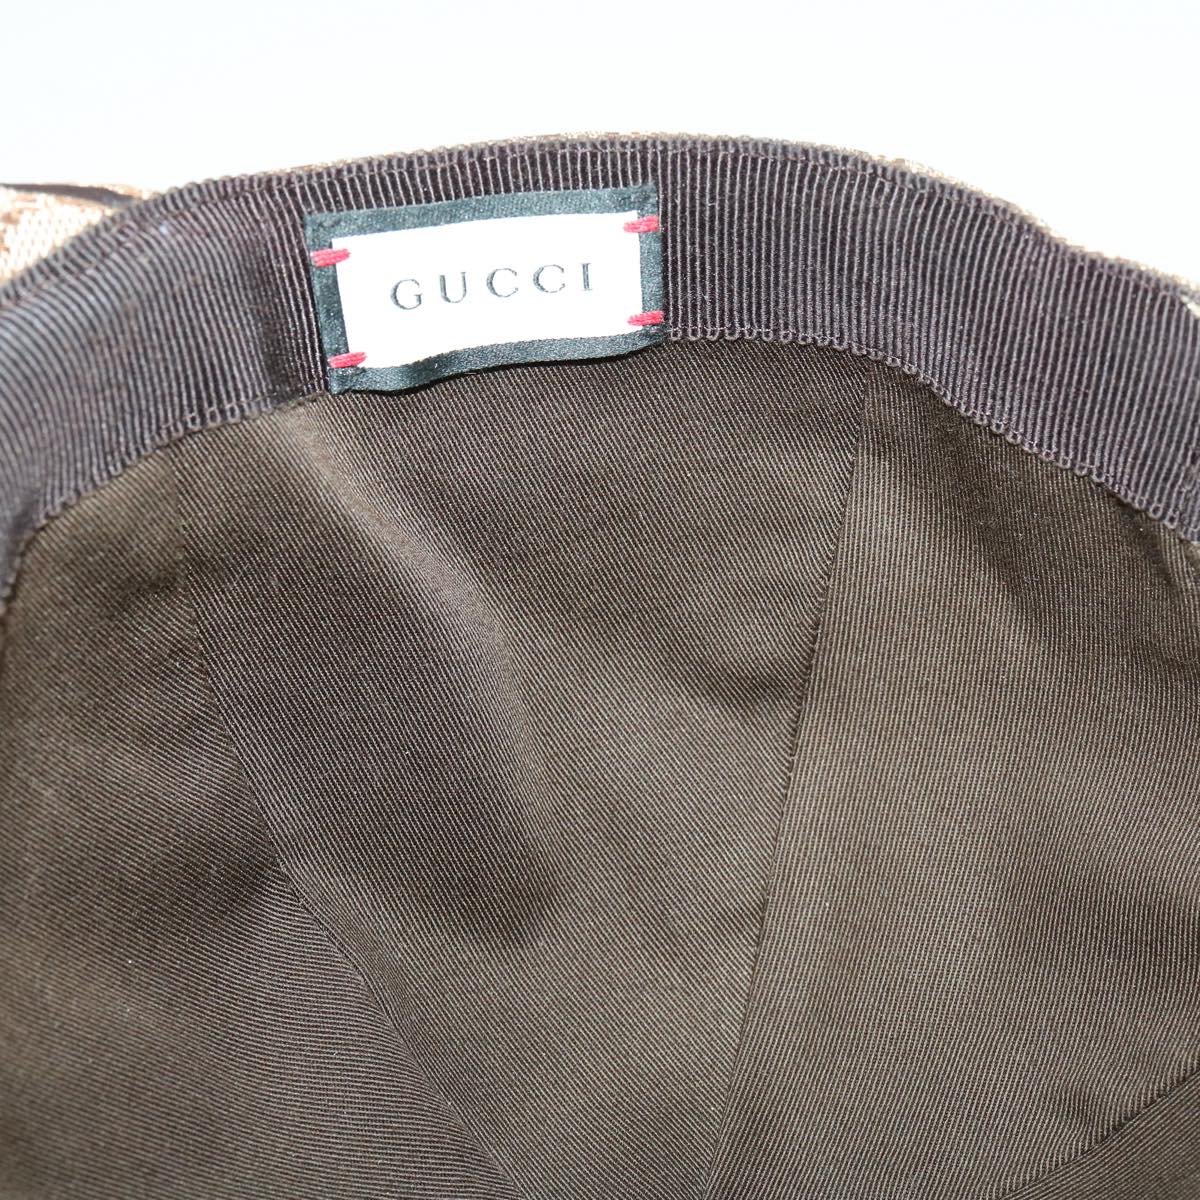 GUCCI Web Sherry Line GG Canvas Cap Beige Green Red Auth am3212